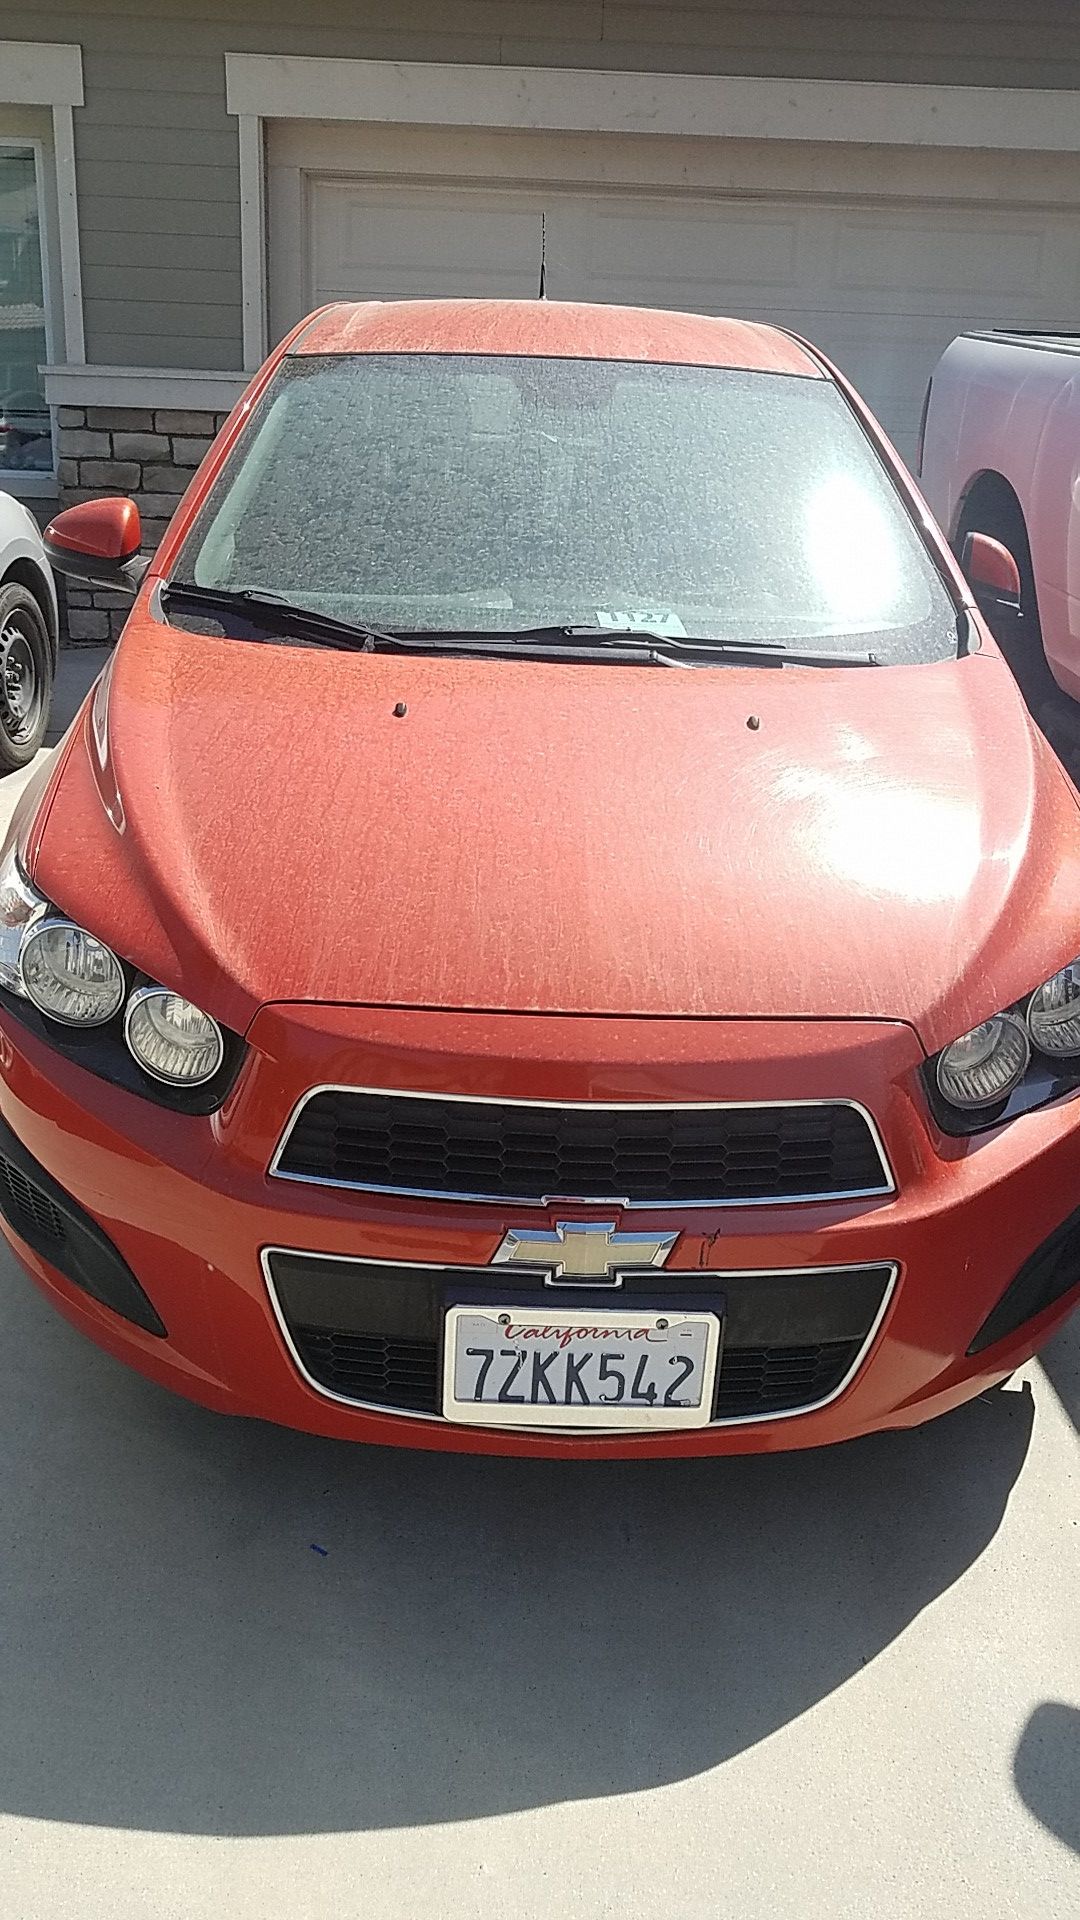 Chevy sonic parts